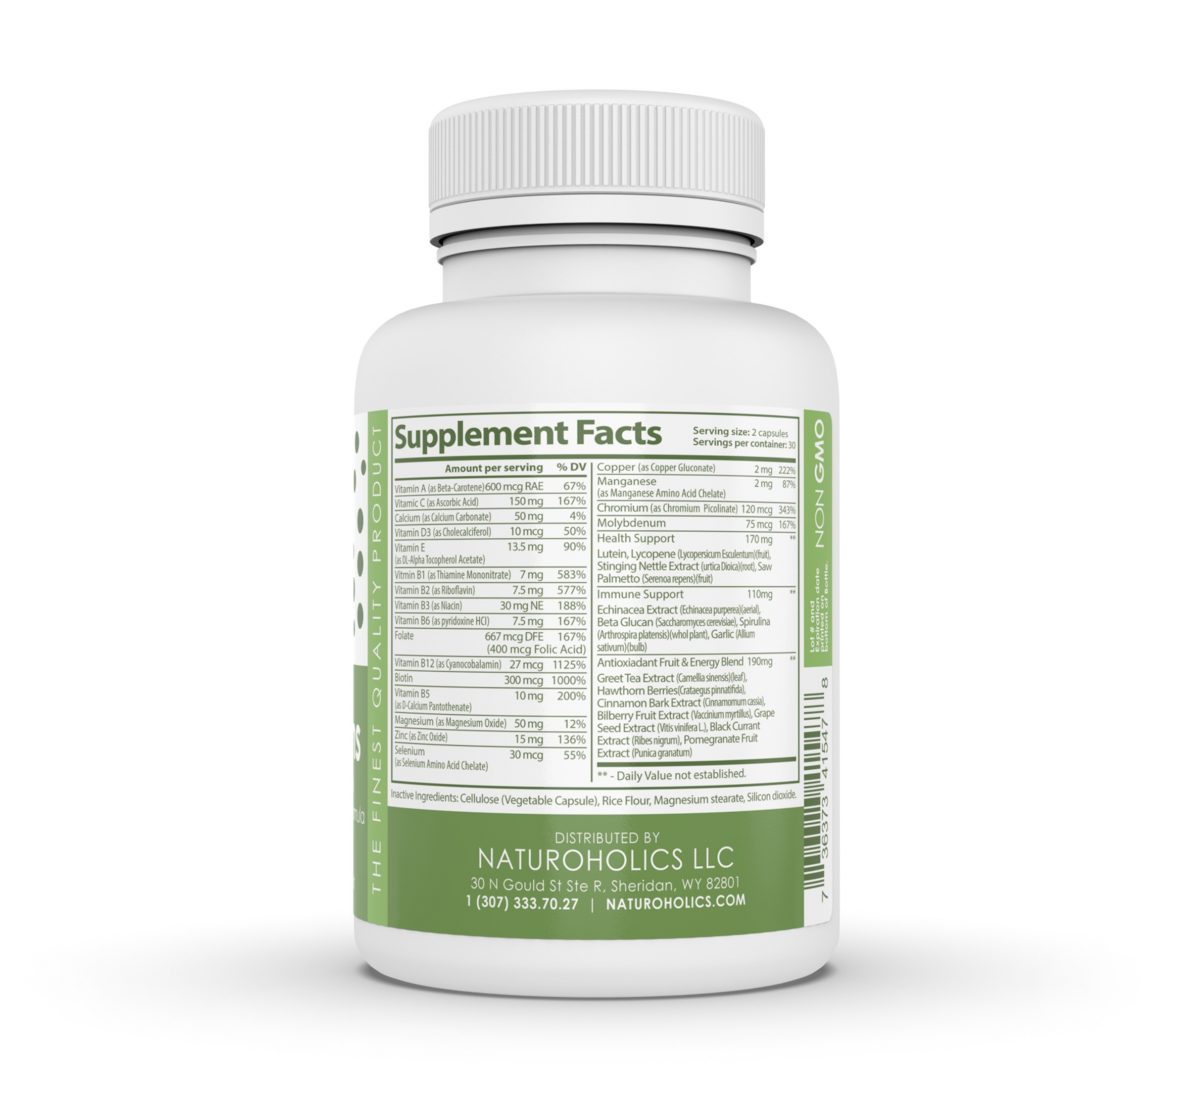 All-in-One Multivitamins